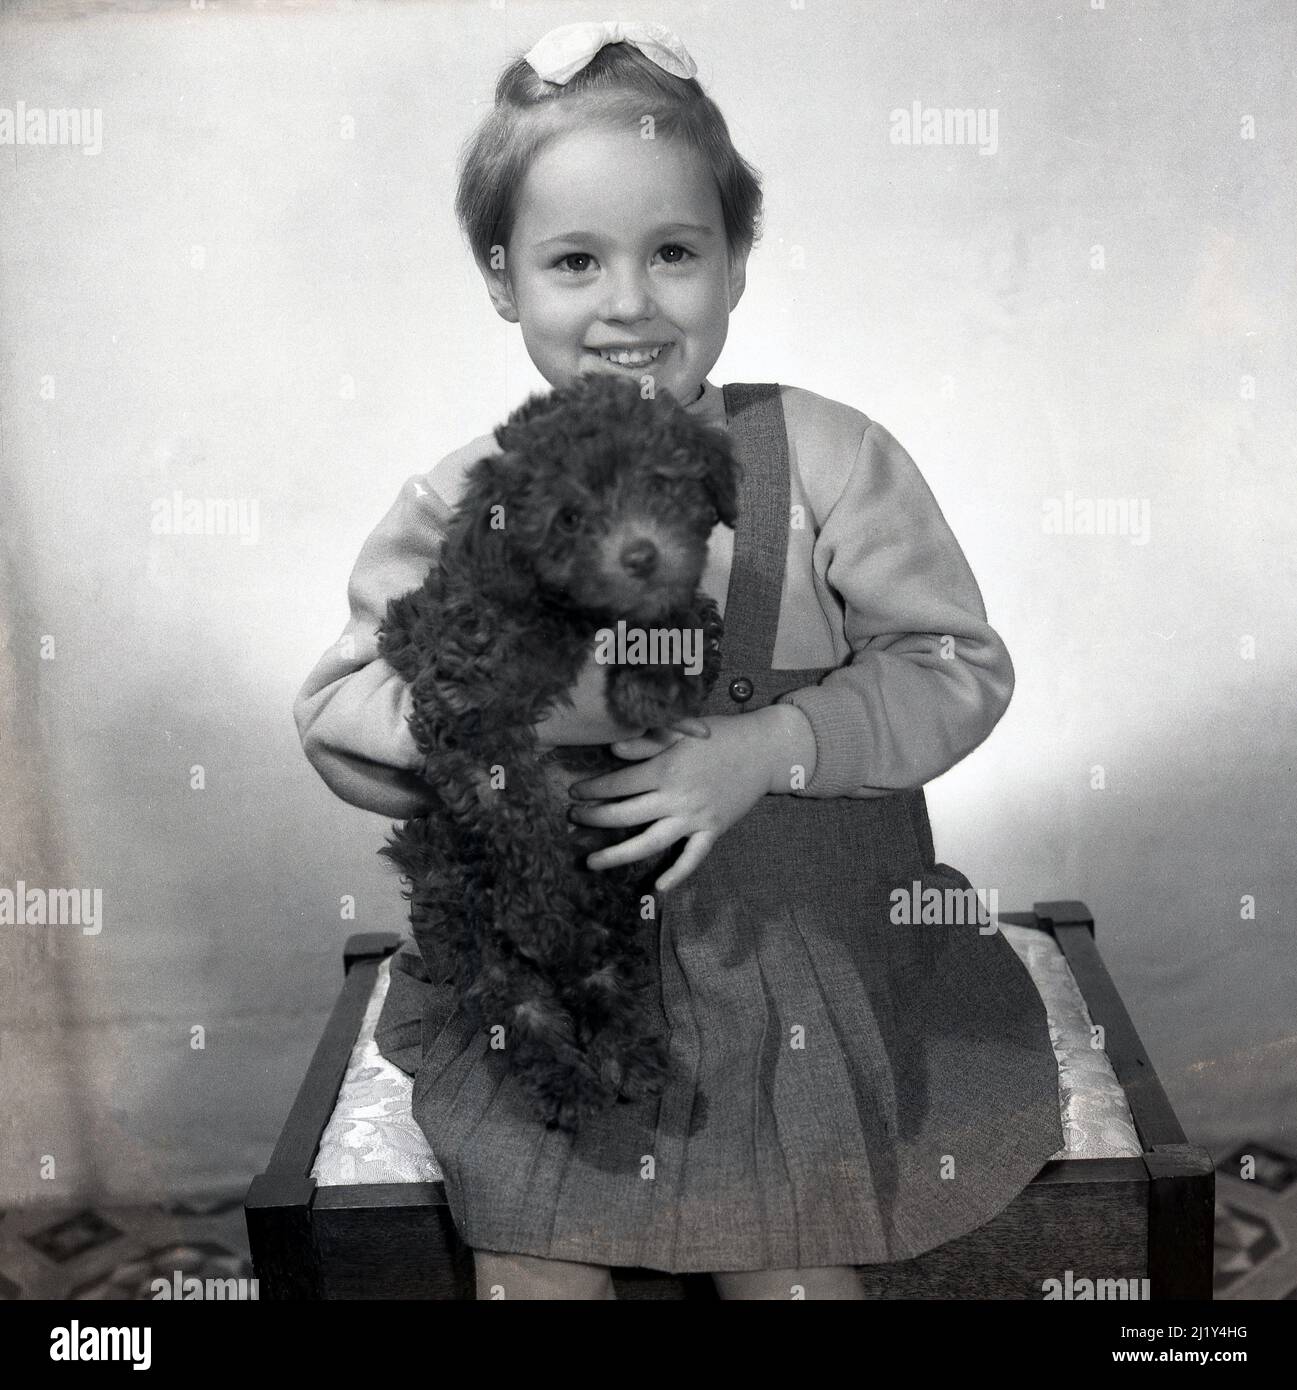 1950s, historical, a sweet little girl with a bow in her hair sitting on a small table for a photo holding her pet dog, a poddle, England, UK. Originally bred for hunting waterfowl, the Kennel Club registered their first poddle in 1874, with an owners club founded two years later. Child friendly, affectionate dogs, poddles became in the 1950s, one of the most popular dog breeds. Stock Photo